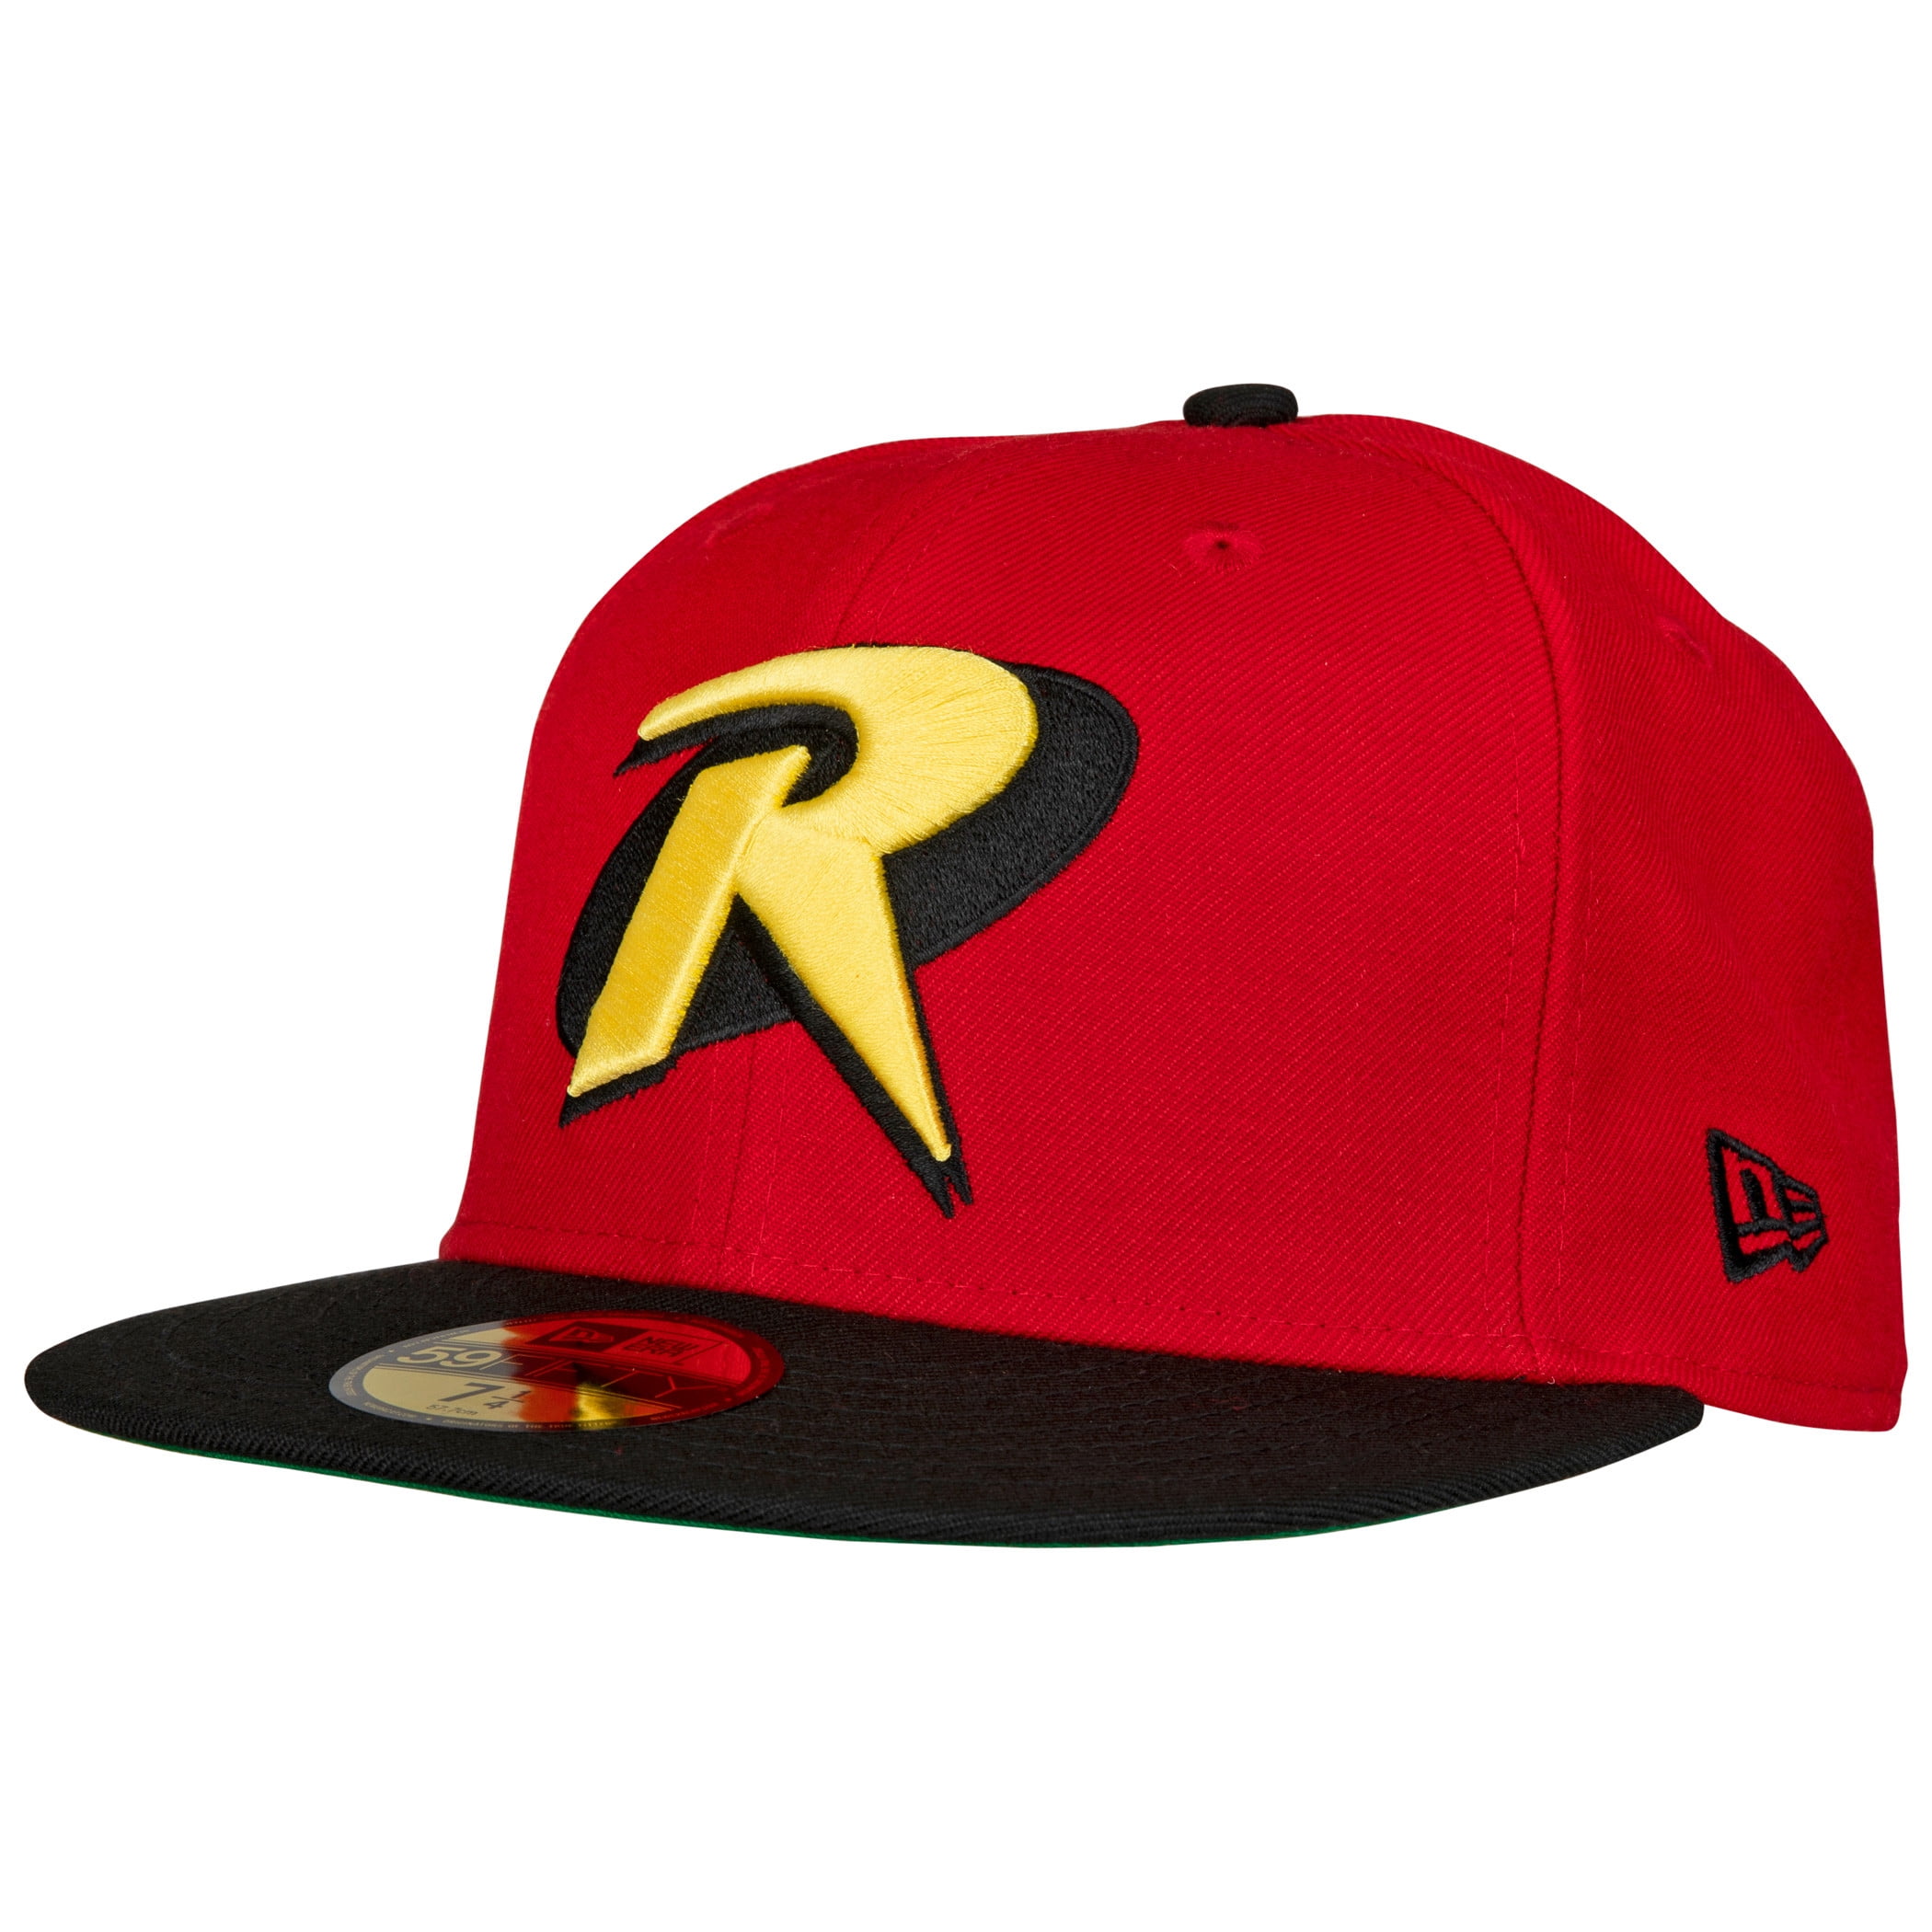 Compare prices for ROBIN HAT across all European  stores